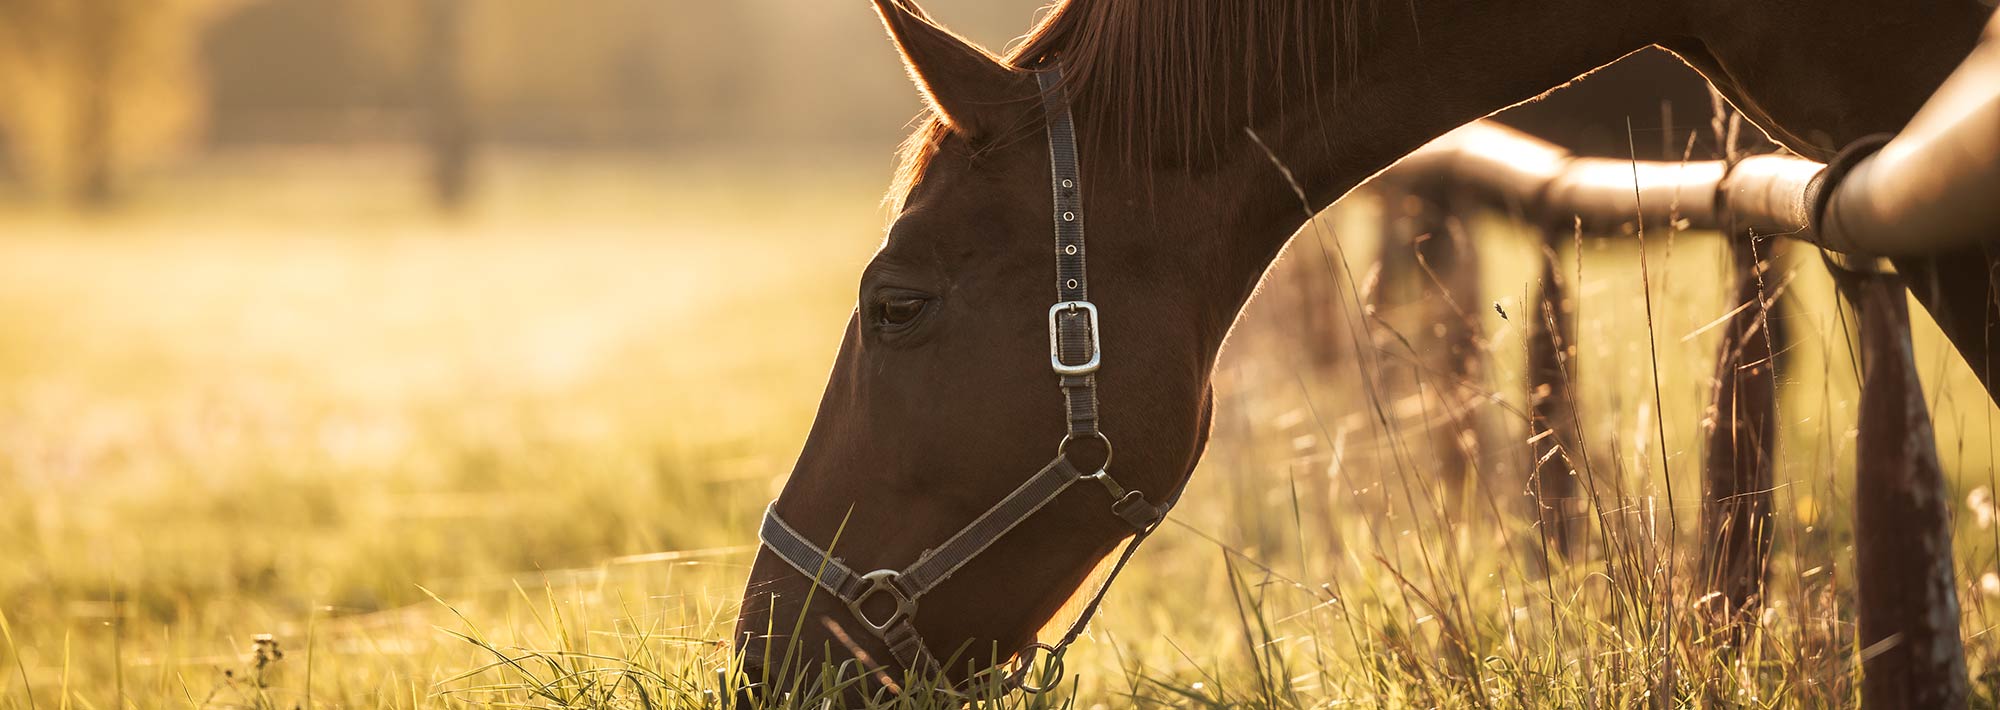 Thoroughbred horse grazing grass on pasture during sunset.